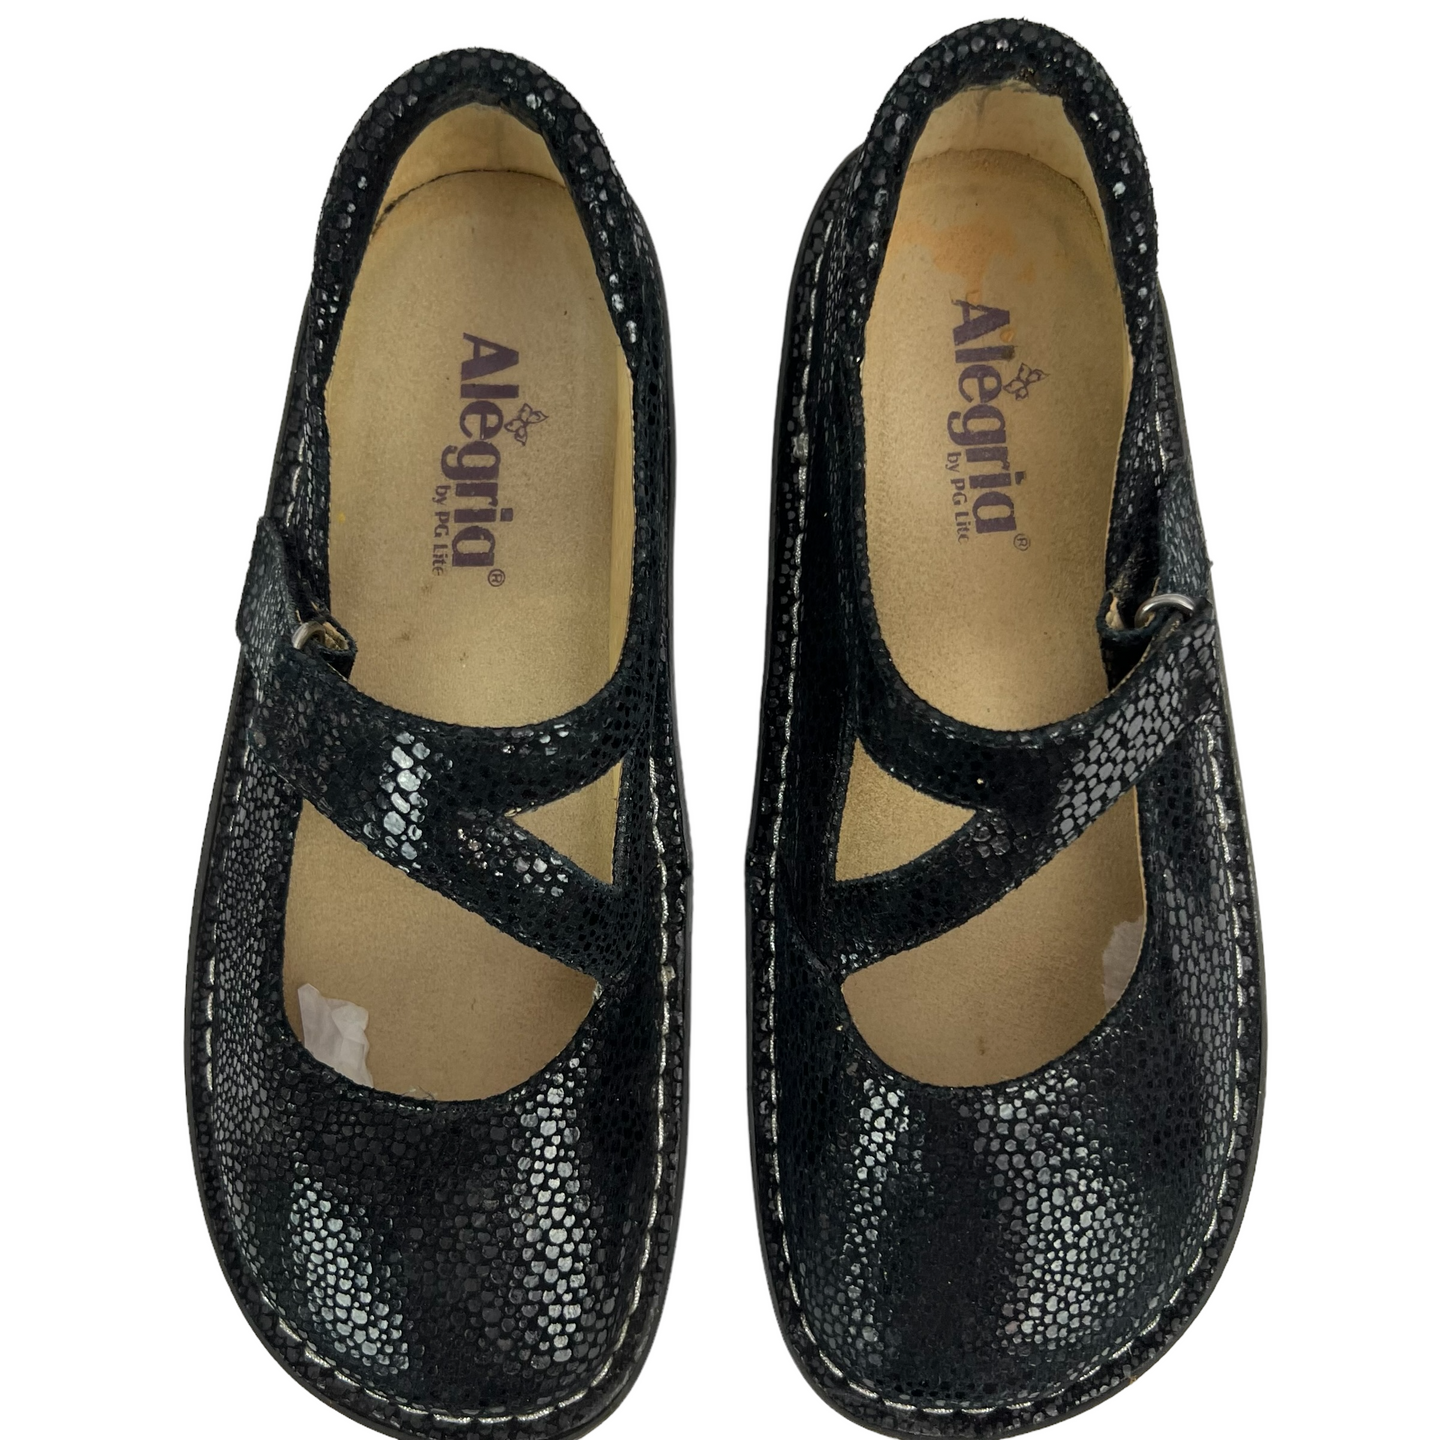 Alegria Mary Jane Shoes Size 38. Color: Black. Material: Suede. 